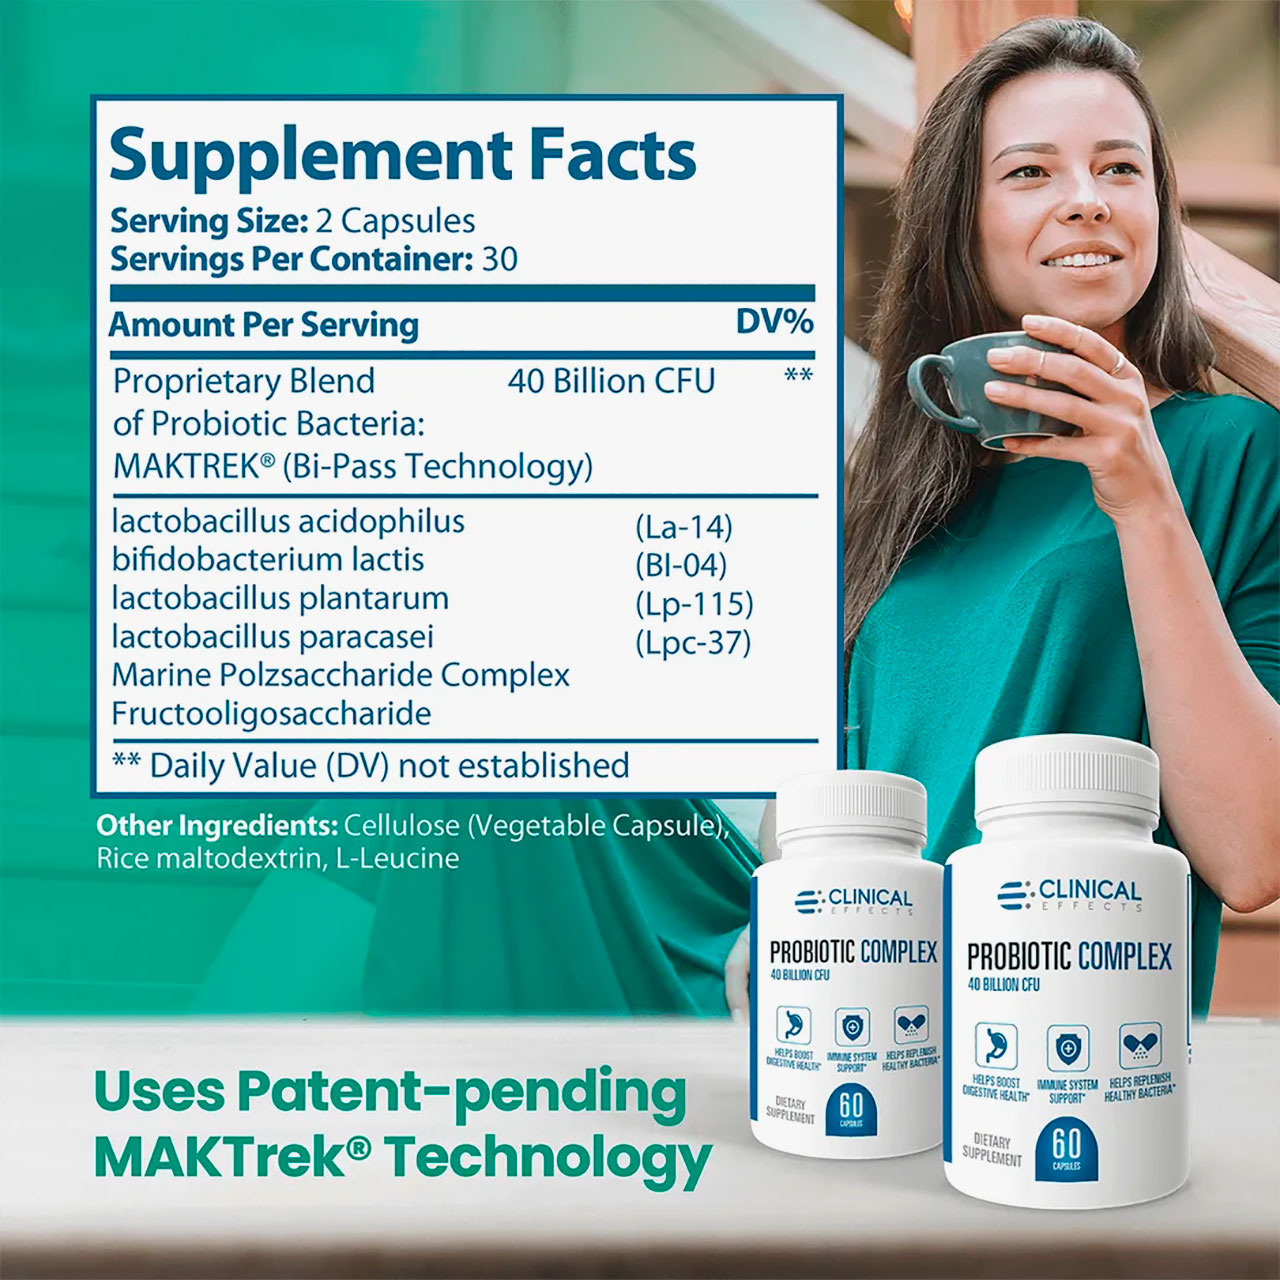 Probiotic Complex by Clinical Effects Supplement Facts